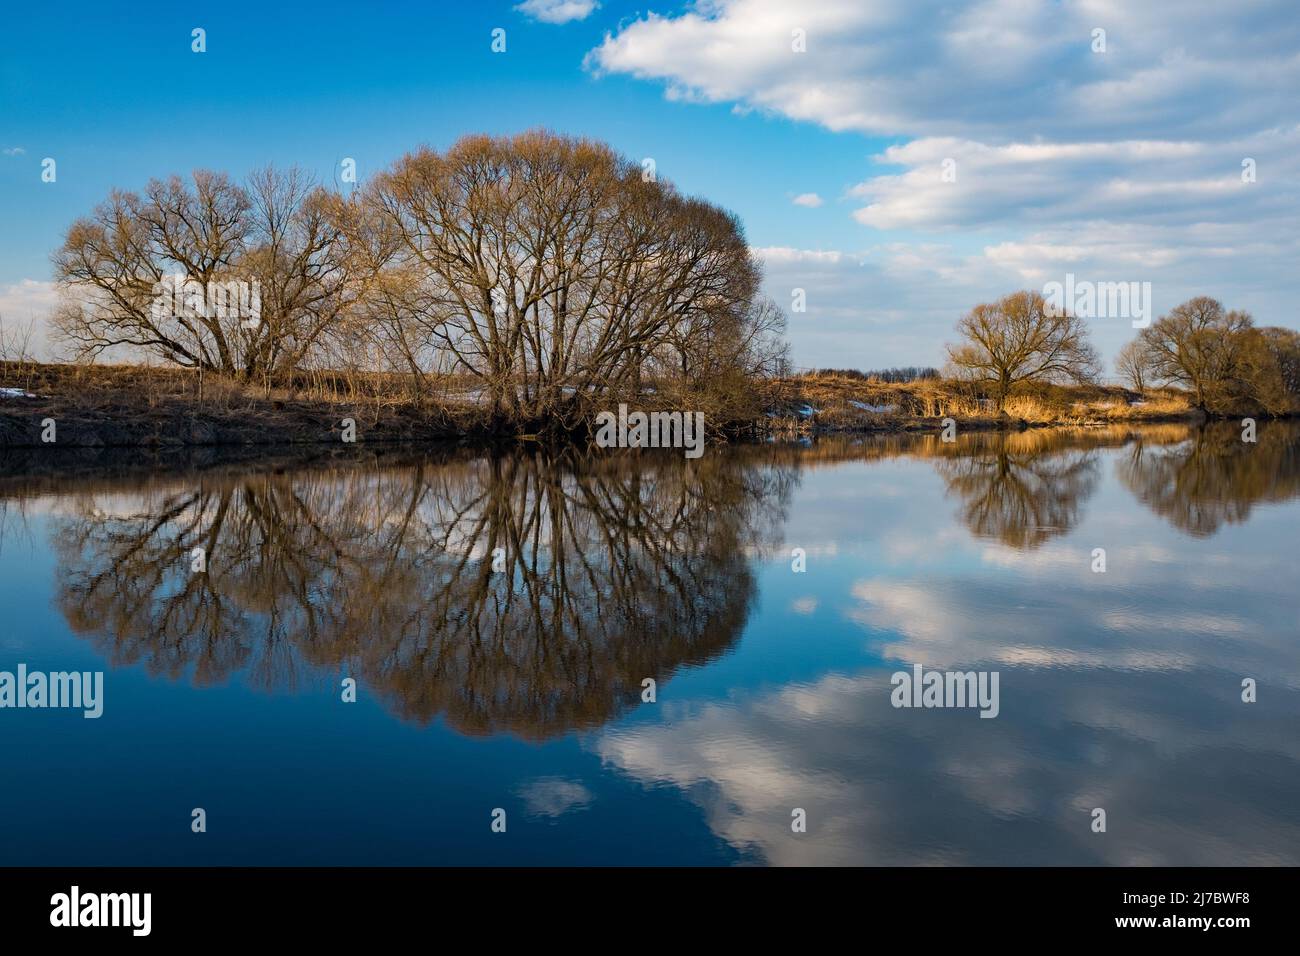 Spring river symmetrical landscape. Blue water with reflection, bare trees without leaves, beautiful clouds on blue sky. Evening light. Stock Photo